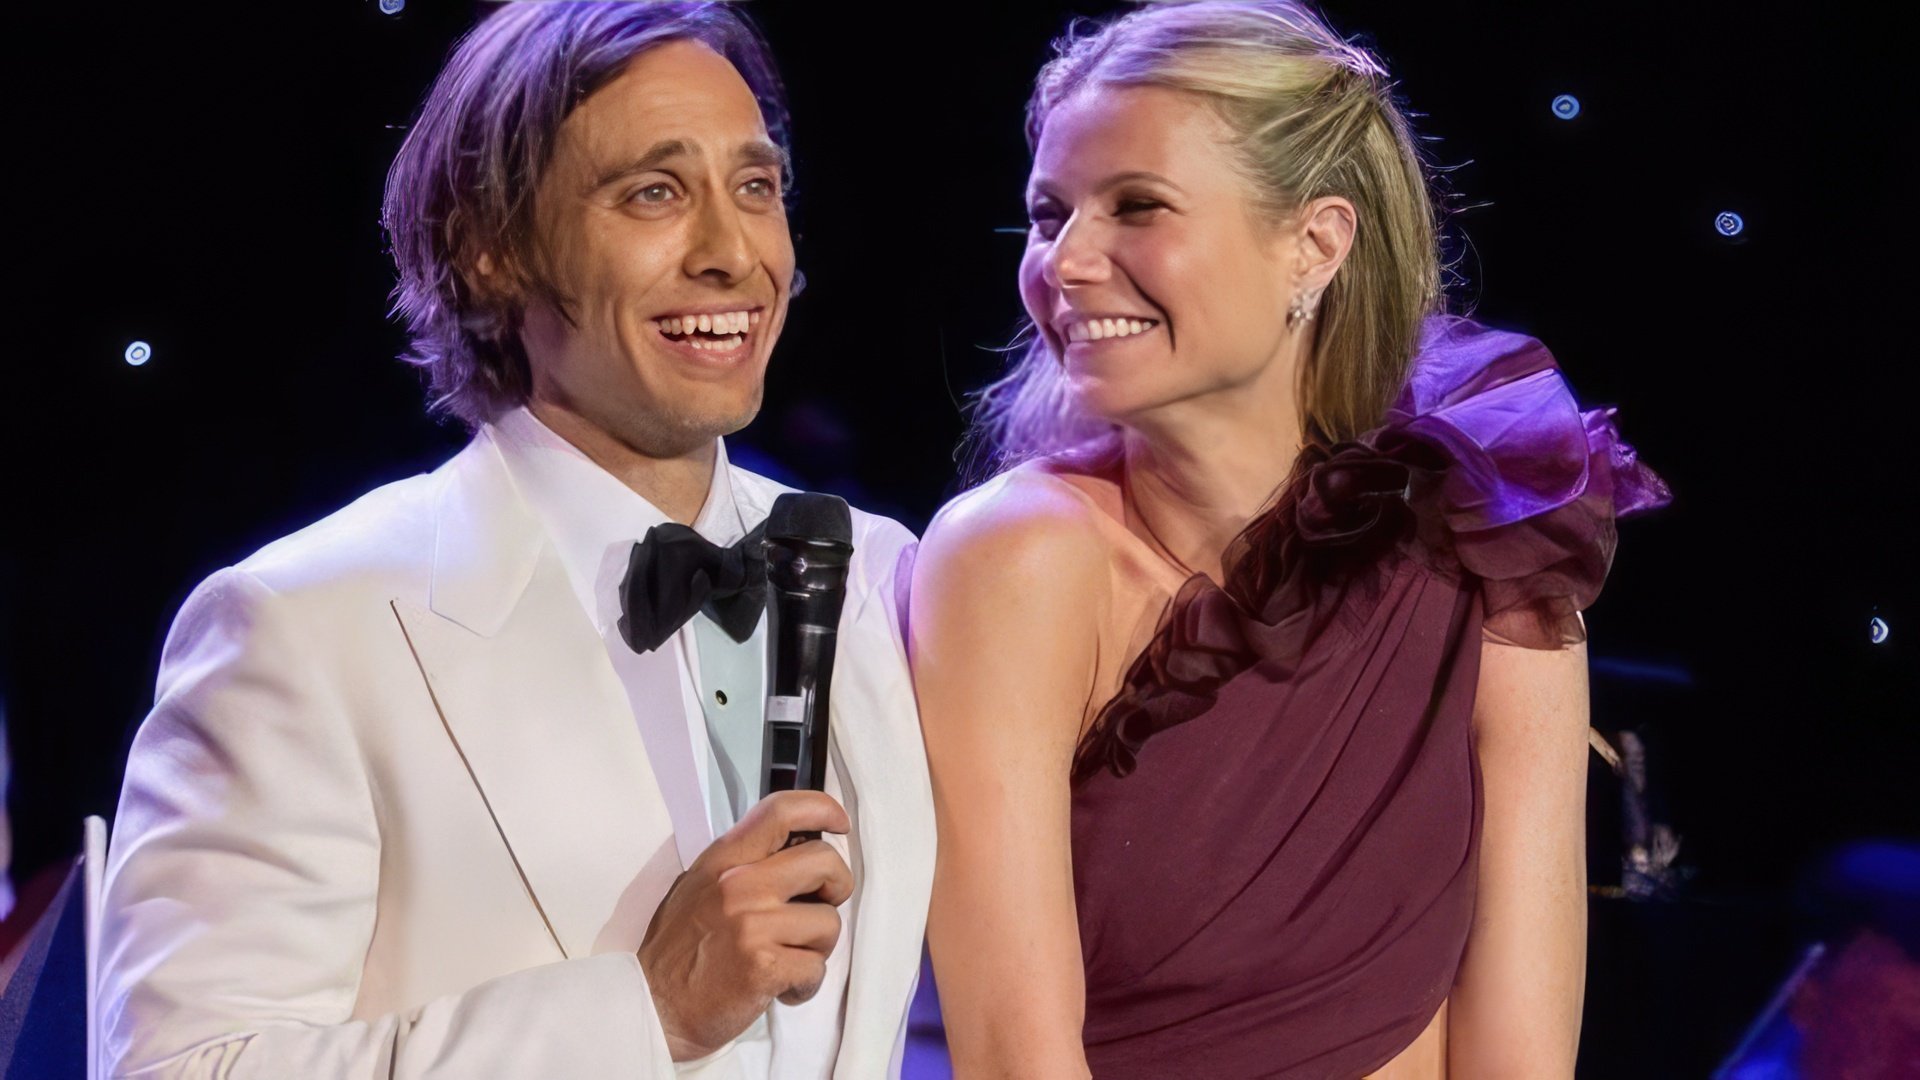 In the fall of 2018, Gwyneth Paltrow and Brad Falchuk got married